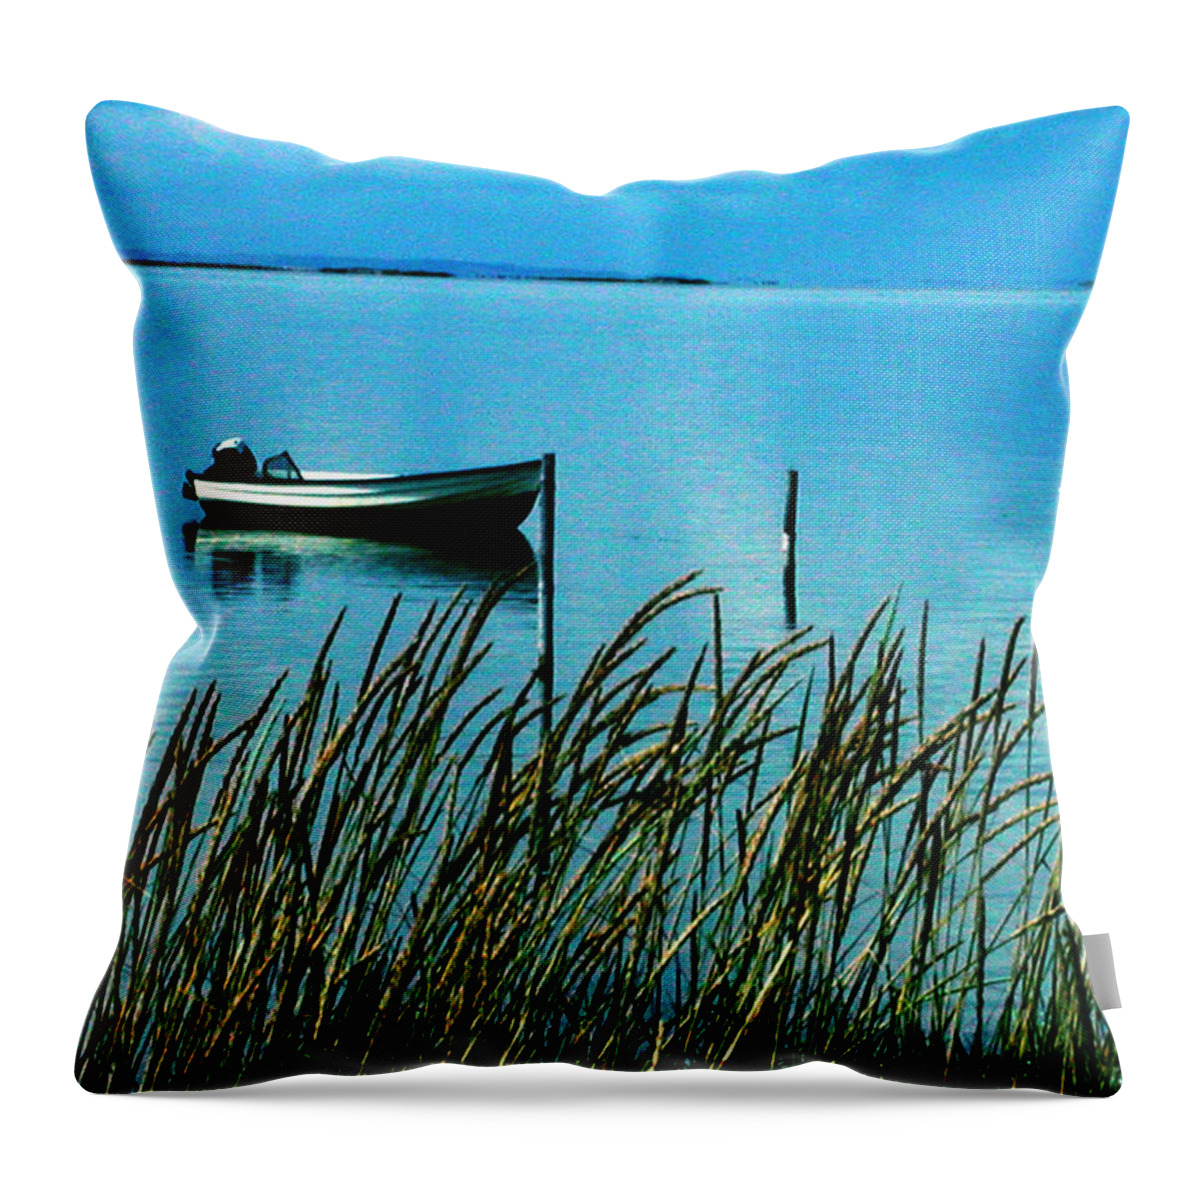 Colette Throw Pillow featuring the photograph Peaceful Samsoe Island Denmark by Colette V Hera Guggenheim